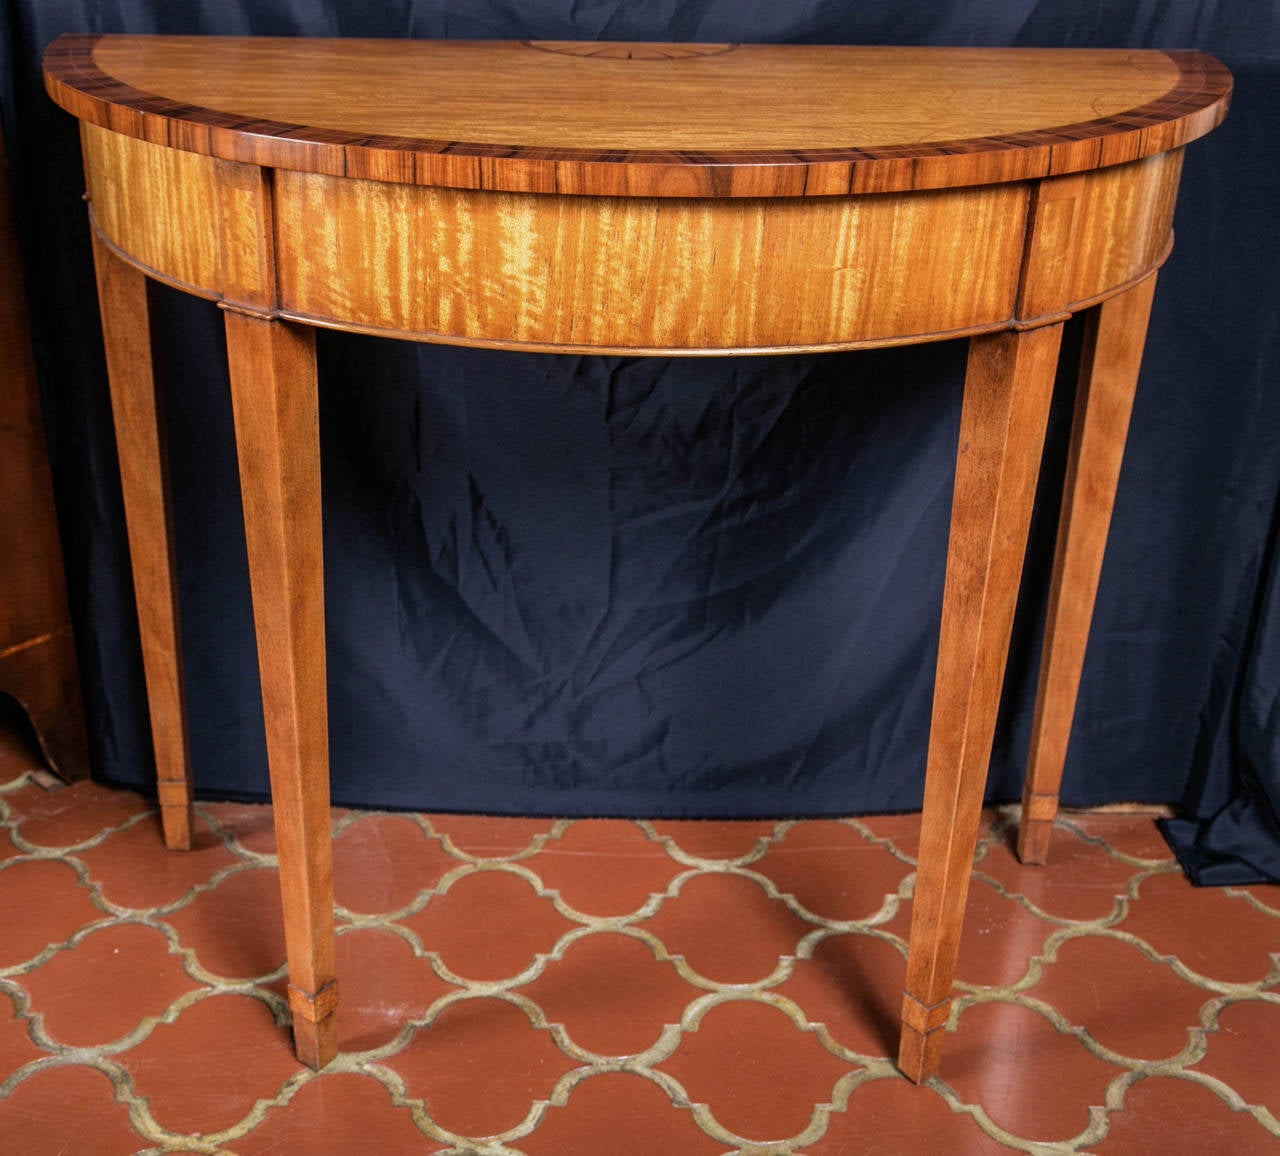 Handmade for us by our English craftsmen, this little demilune / console shines with the reflective qualities inherent in satinwood. Light dances off the grain and gives the surface a rich, satiny look that allows it to ably cross stylistic